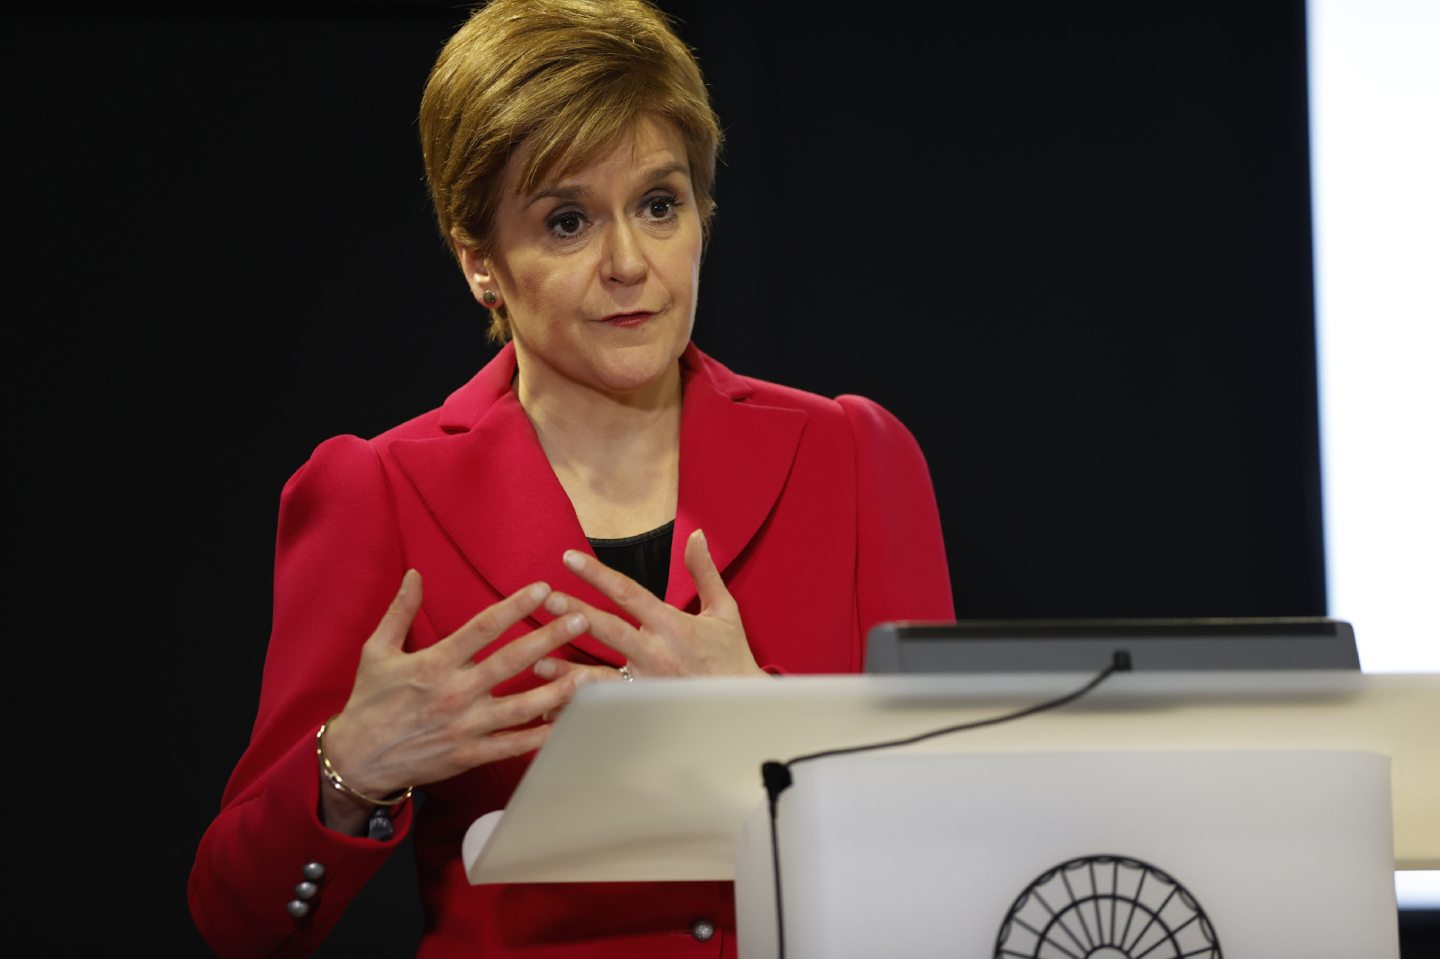 Scotland's First Minister Nicola Sturgeon speaking at a news conference in Edinburgh.